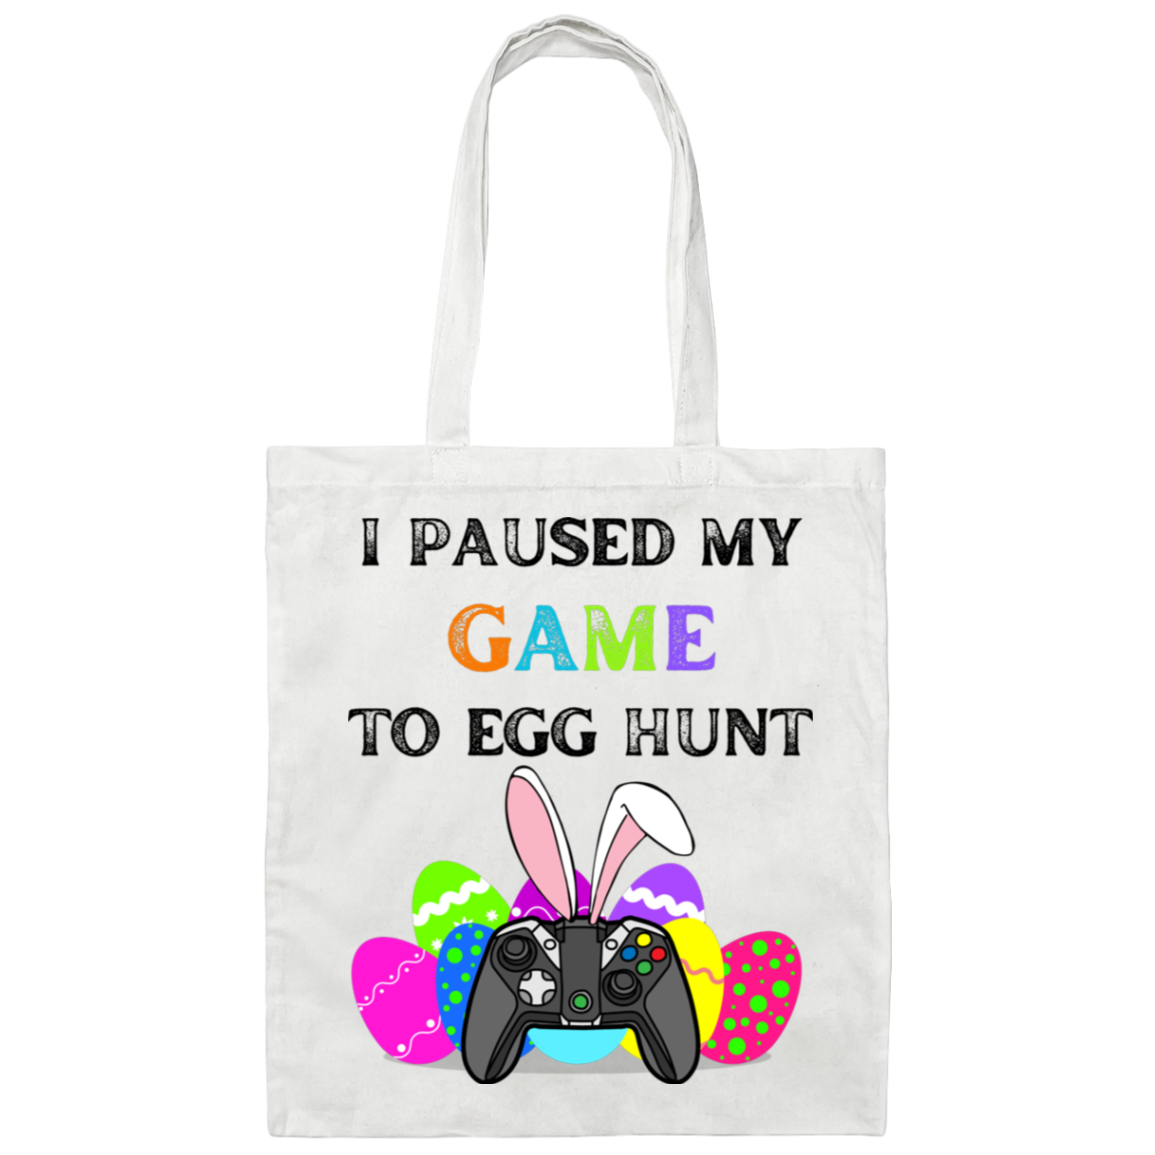 Paused My Game to Egg Hunt Canvas Tote Bag